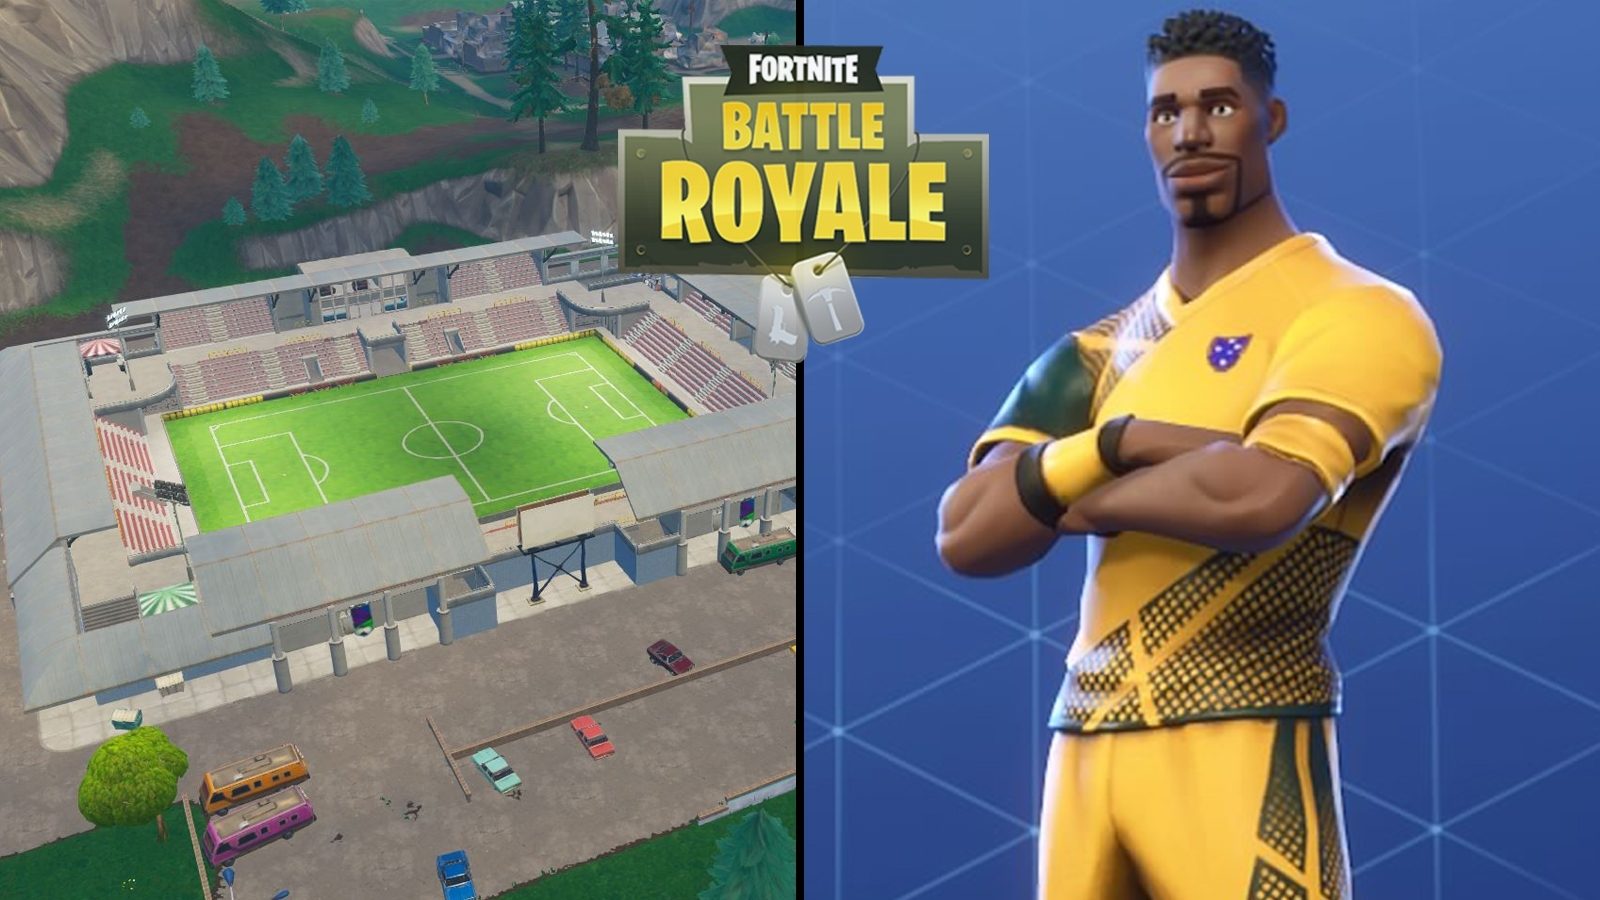 Fortnite' adds NFL uniforms and other football gear